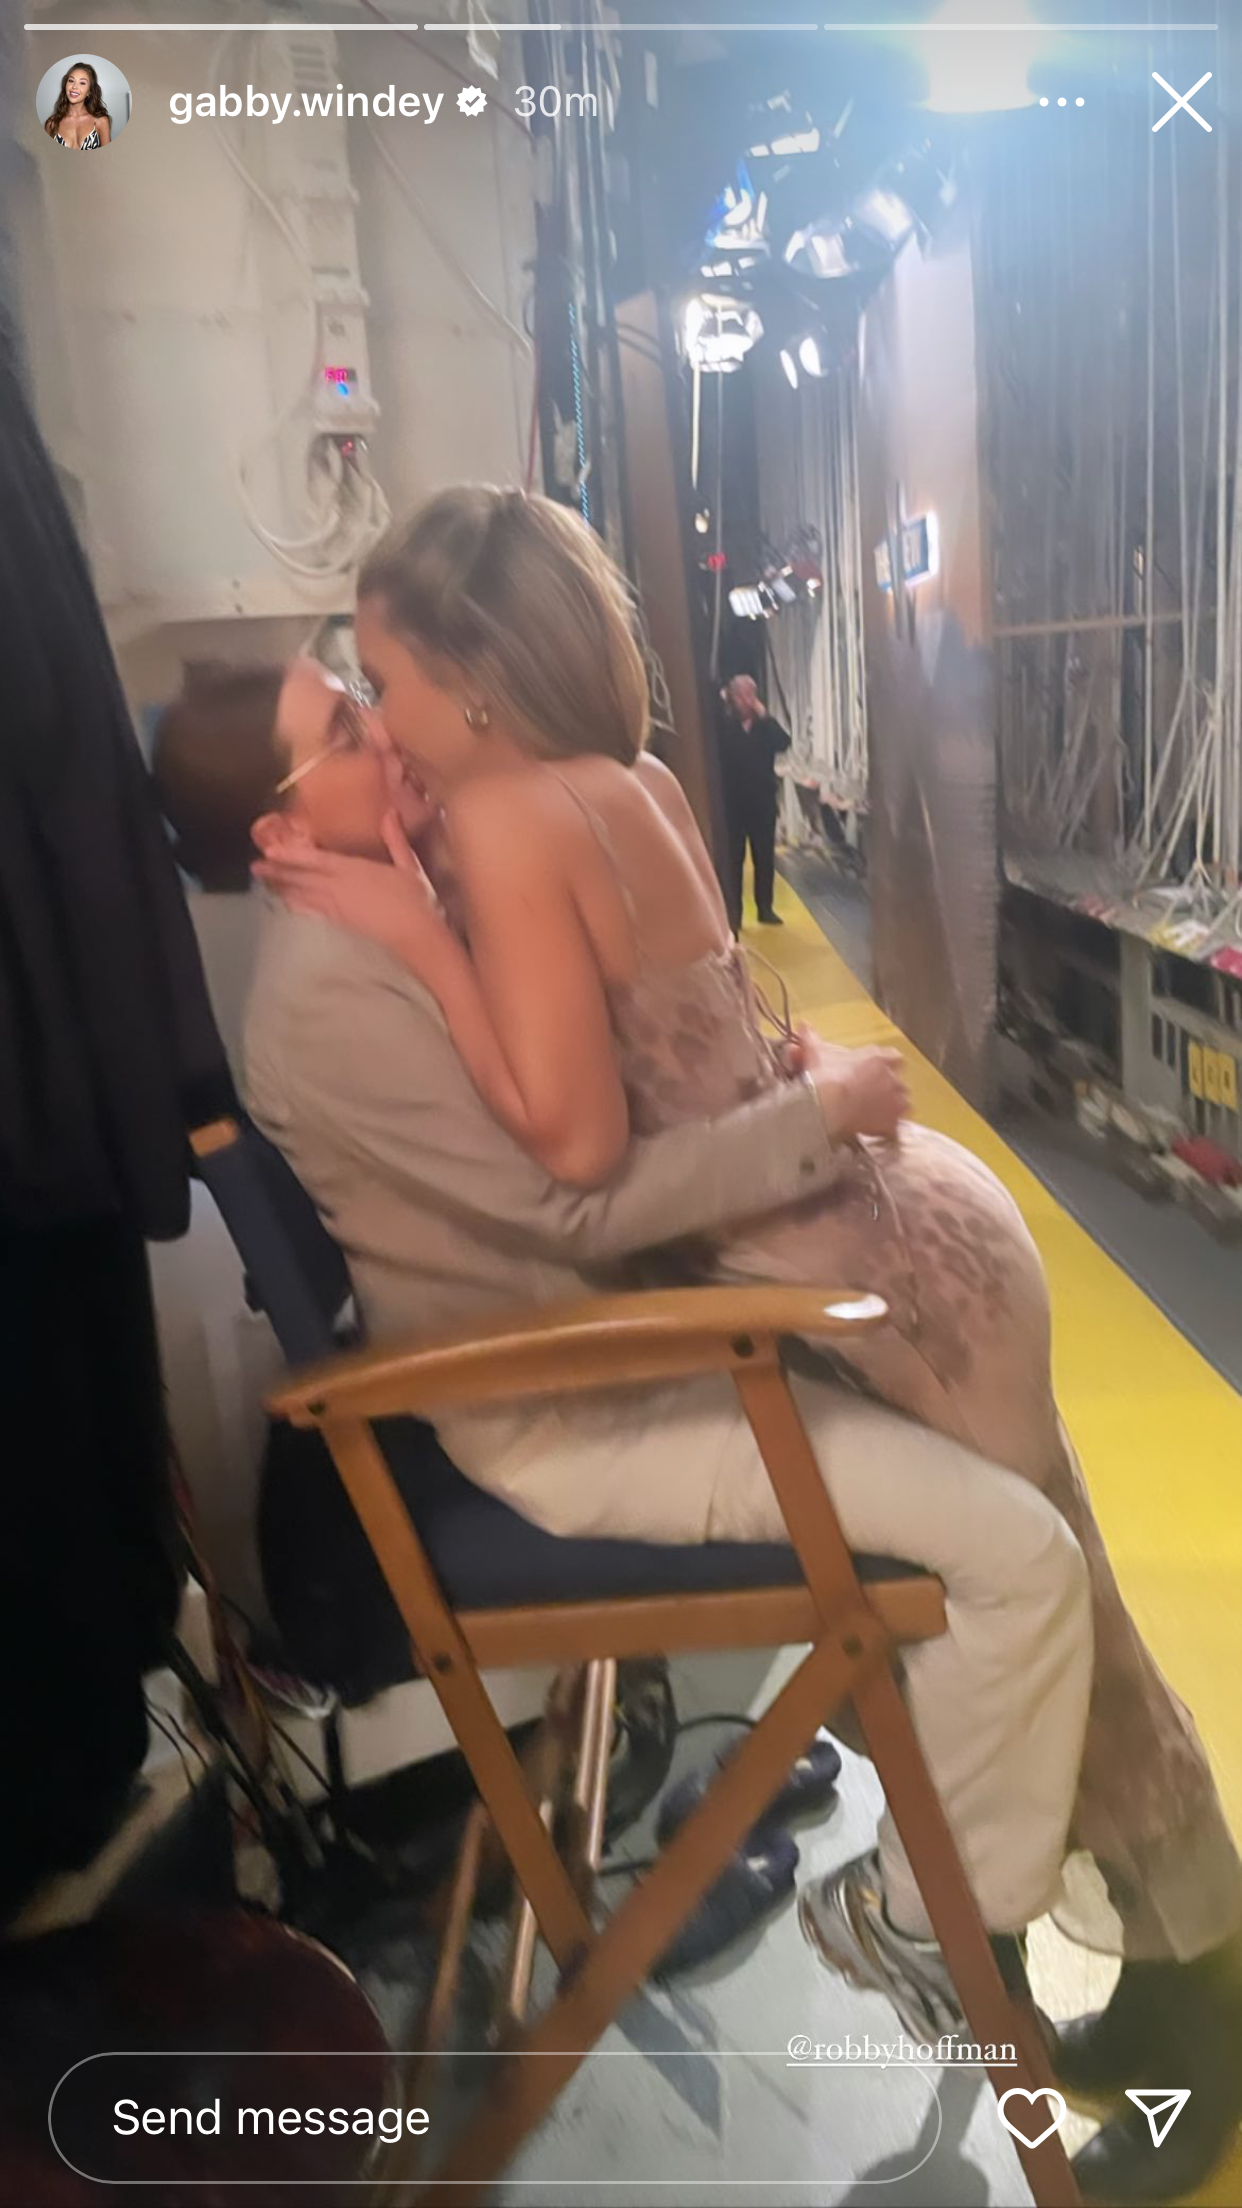 Gabby Windey and her gf kissing on the set of The View